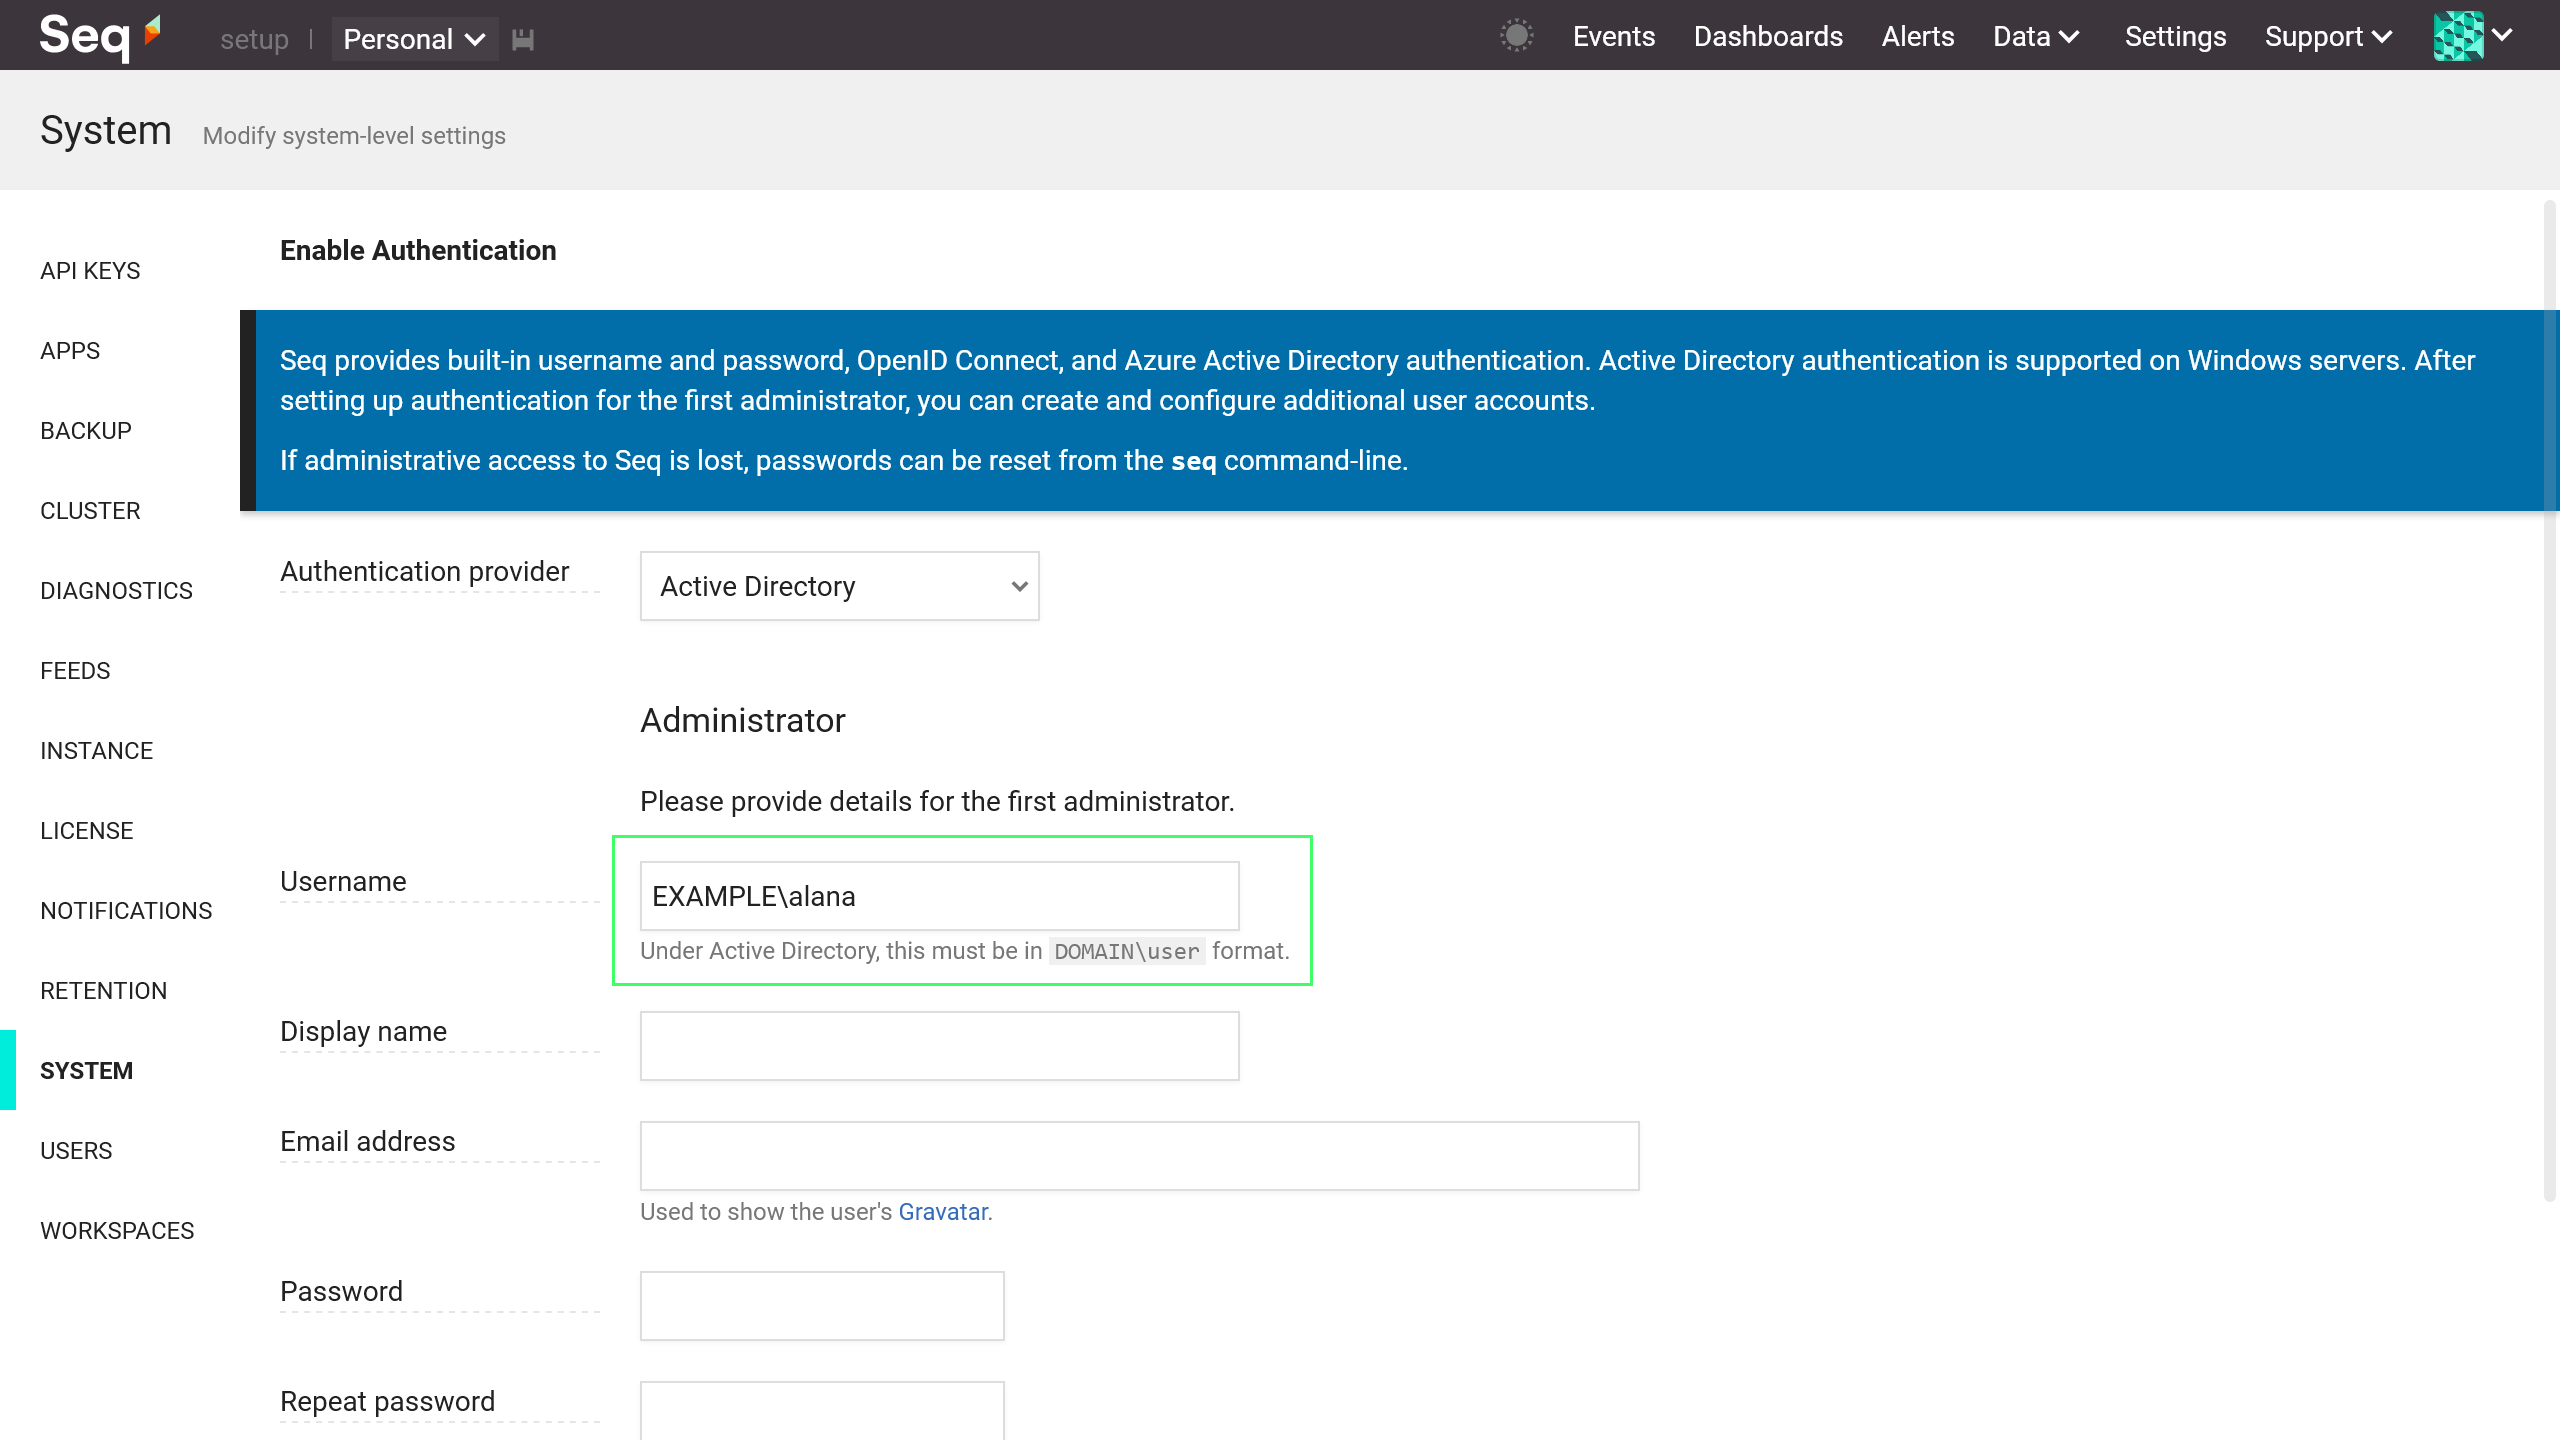 Enabling Active Directory authentication on a new Seq instance.